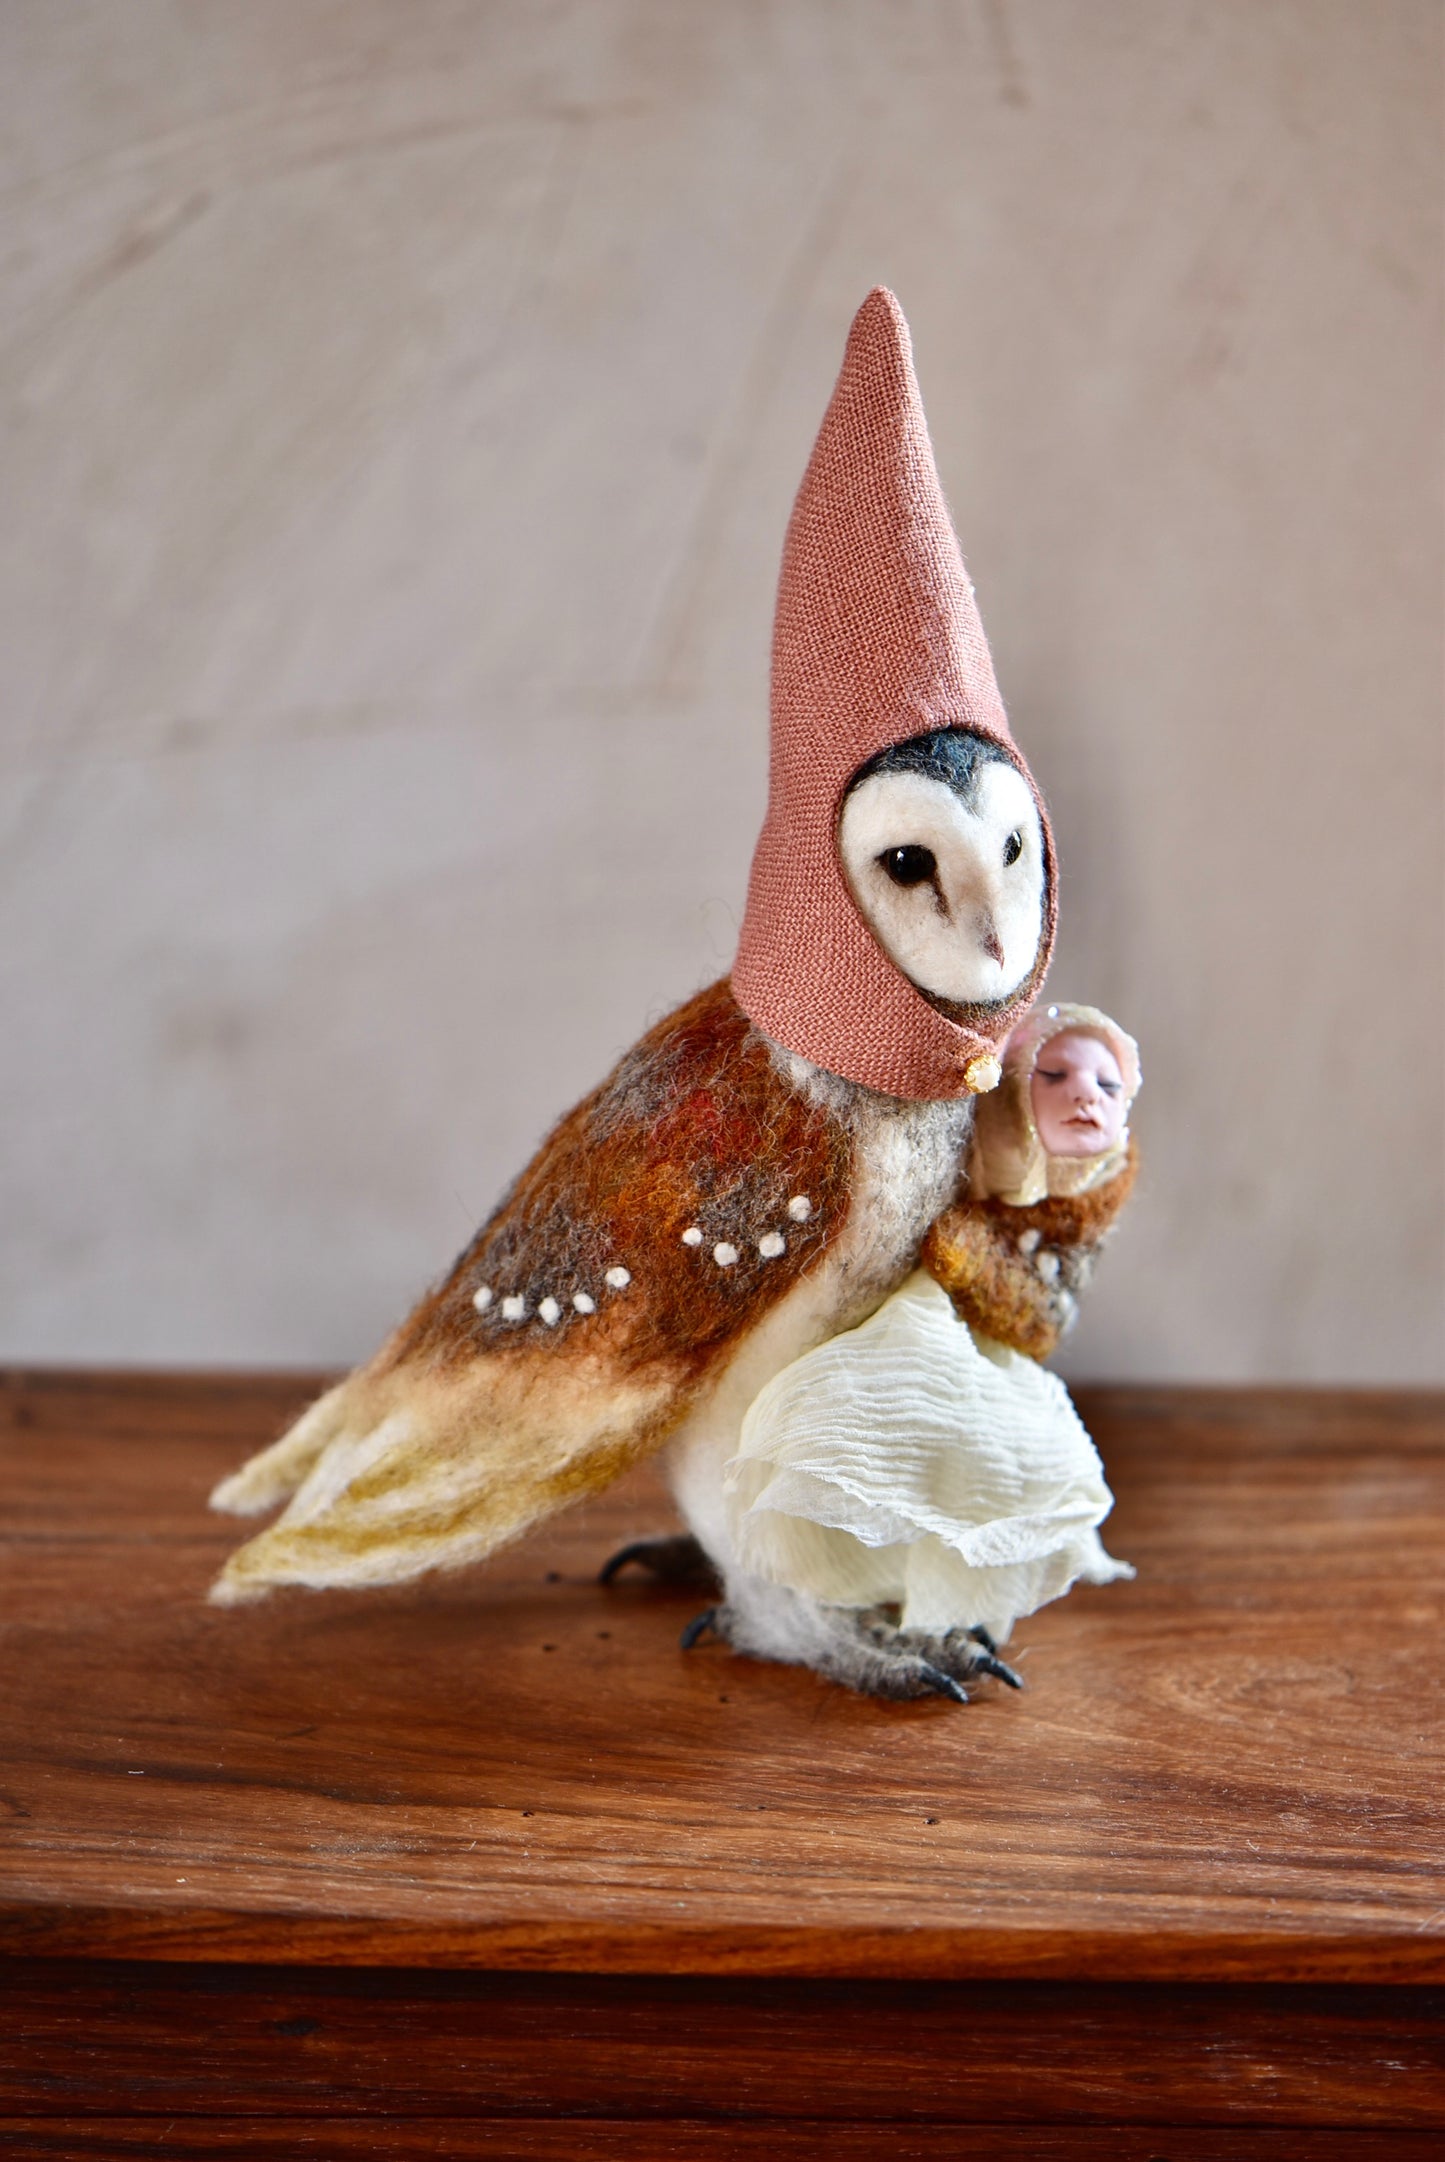 Nursery Godmother With Baby Fairy- Ooak - Harthicune collaboration